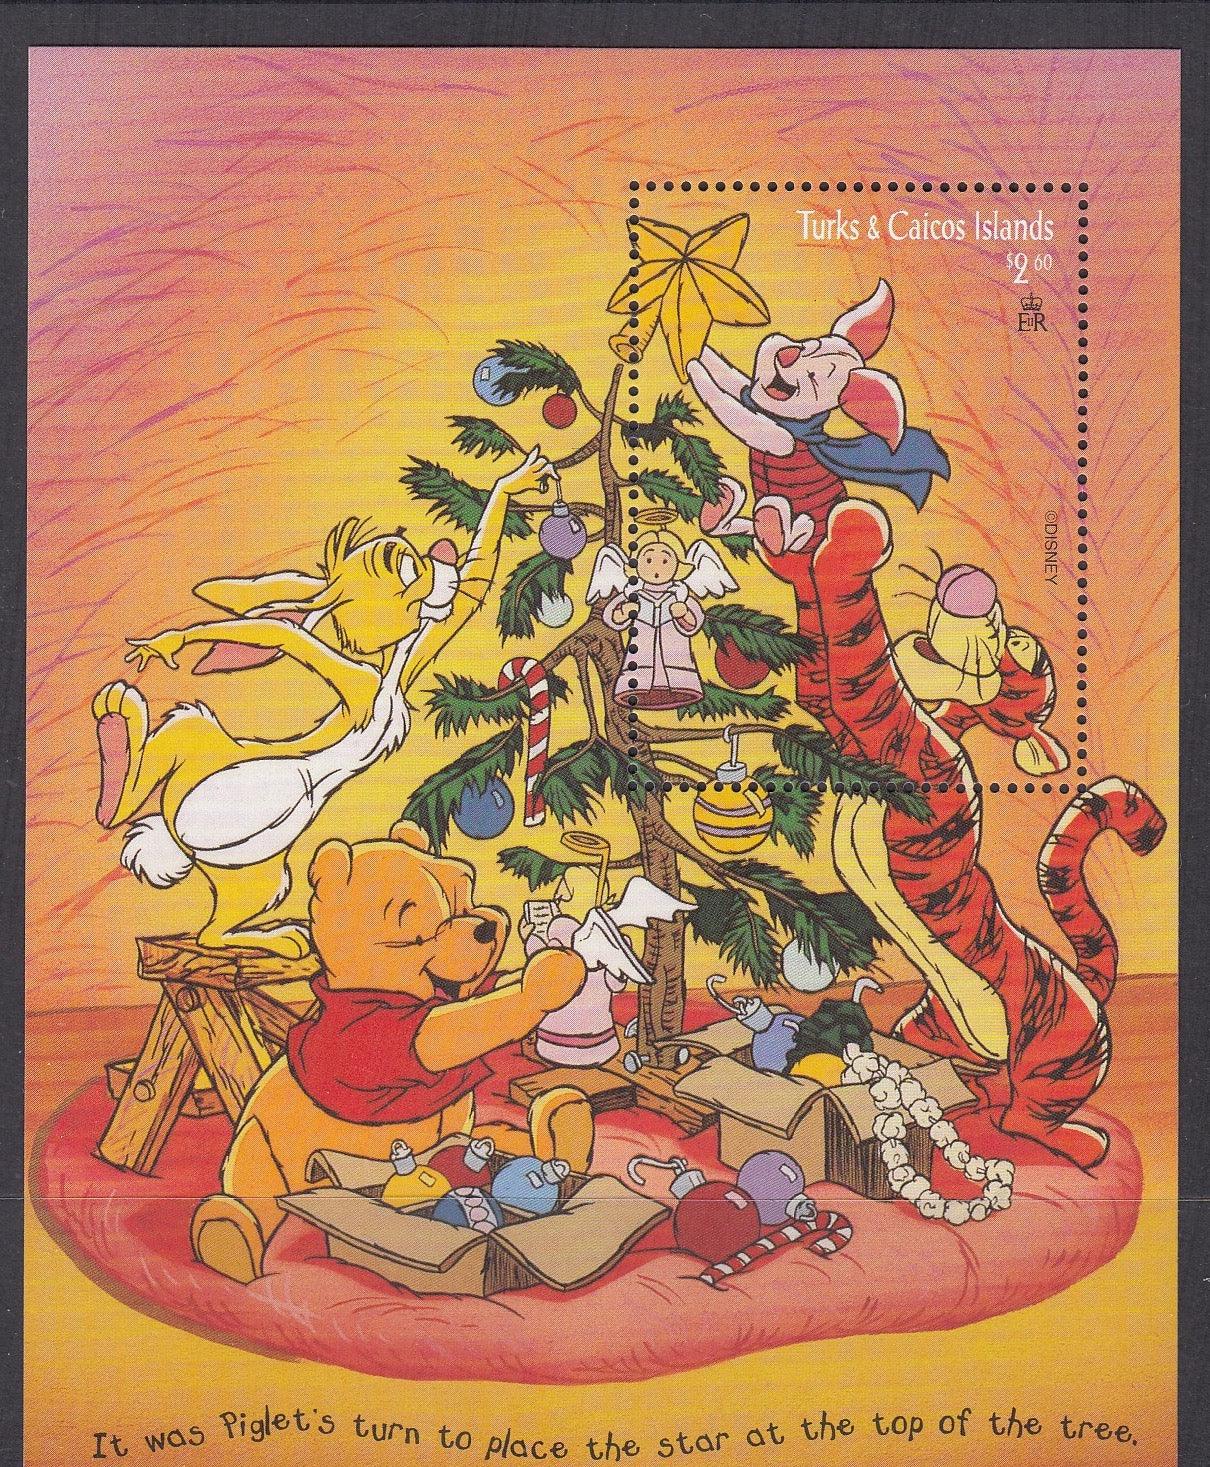 Turks & Caicos Islands 1996 - $2.60 Pooh & Piglet Place Star on Christmas Tree Disney Miniature Sheet - Mint Unhinged - Loose Change Coins